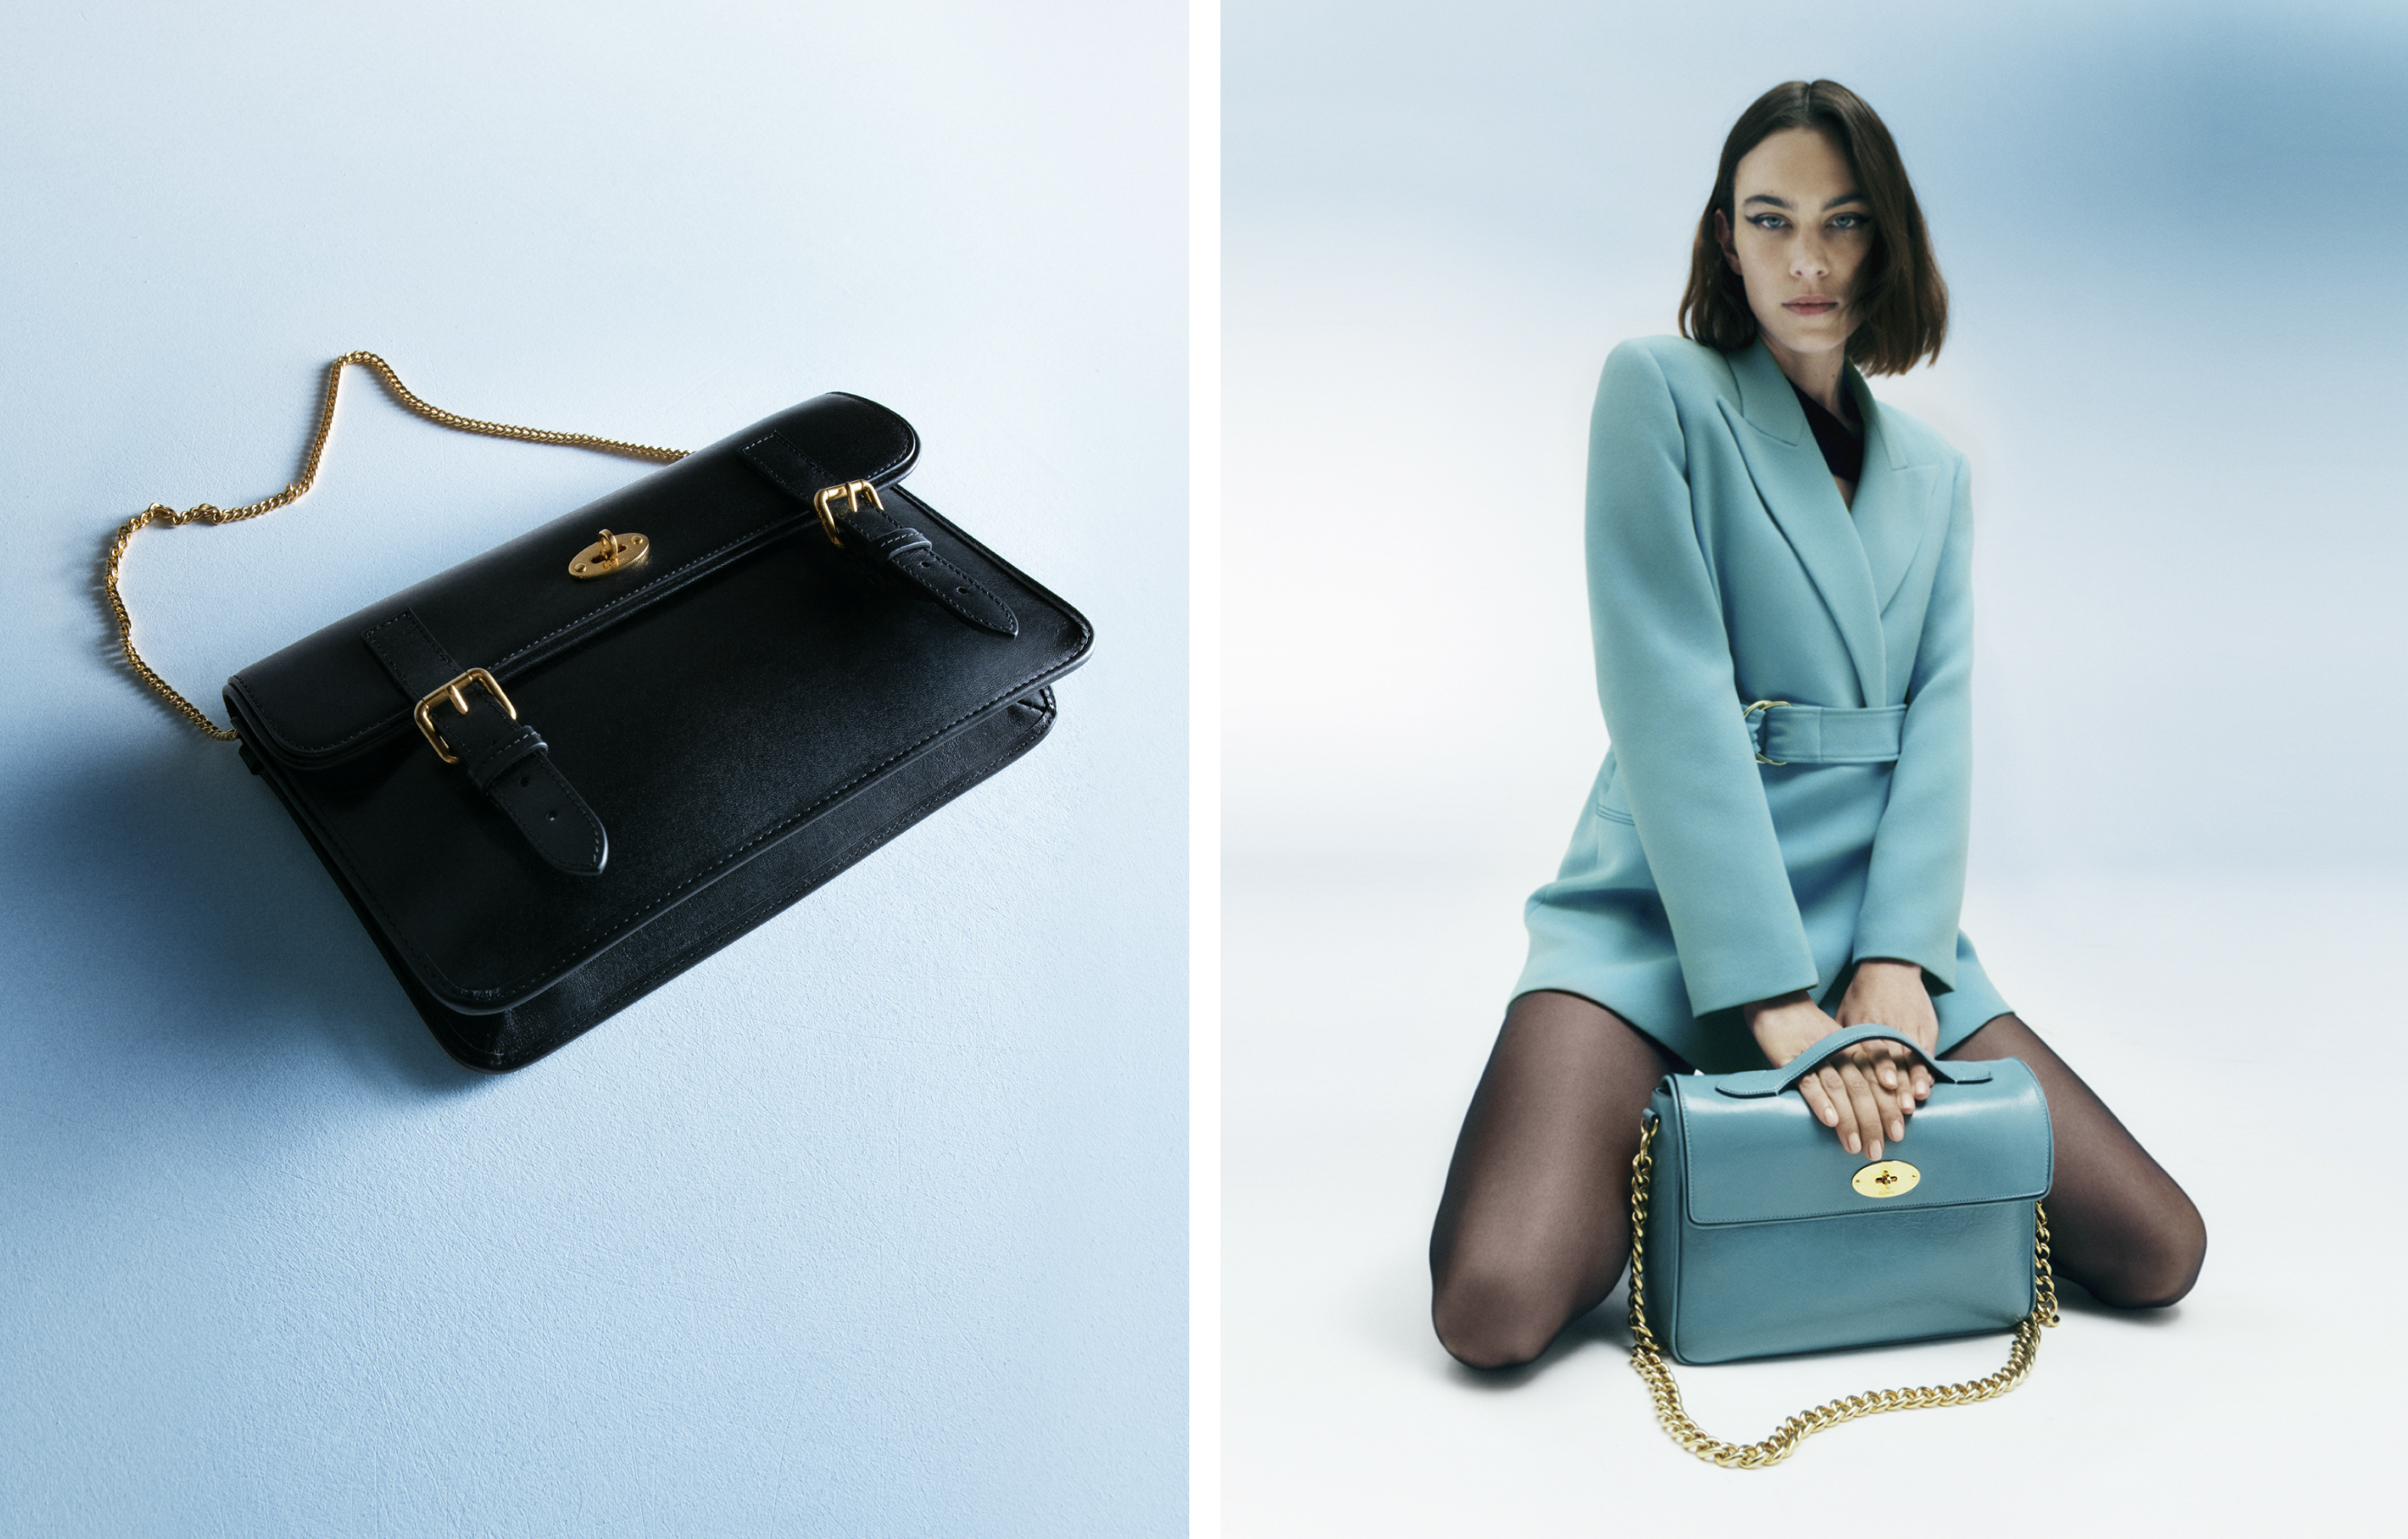 MULBERRY'S 50TH ANNIVERSARY CELEBRATIONS CONTINUE WITH ALEXA CHUNG